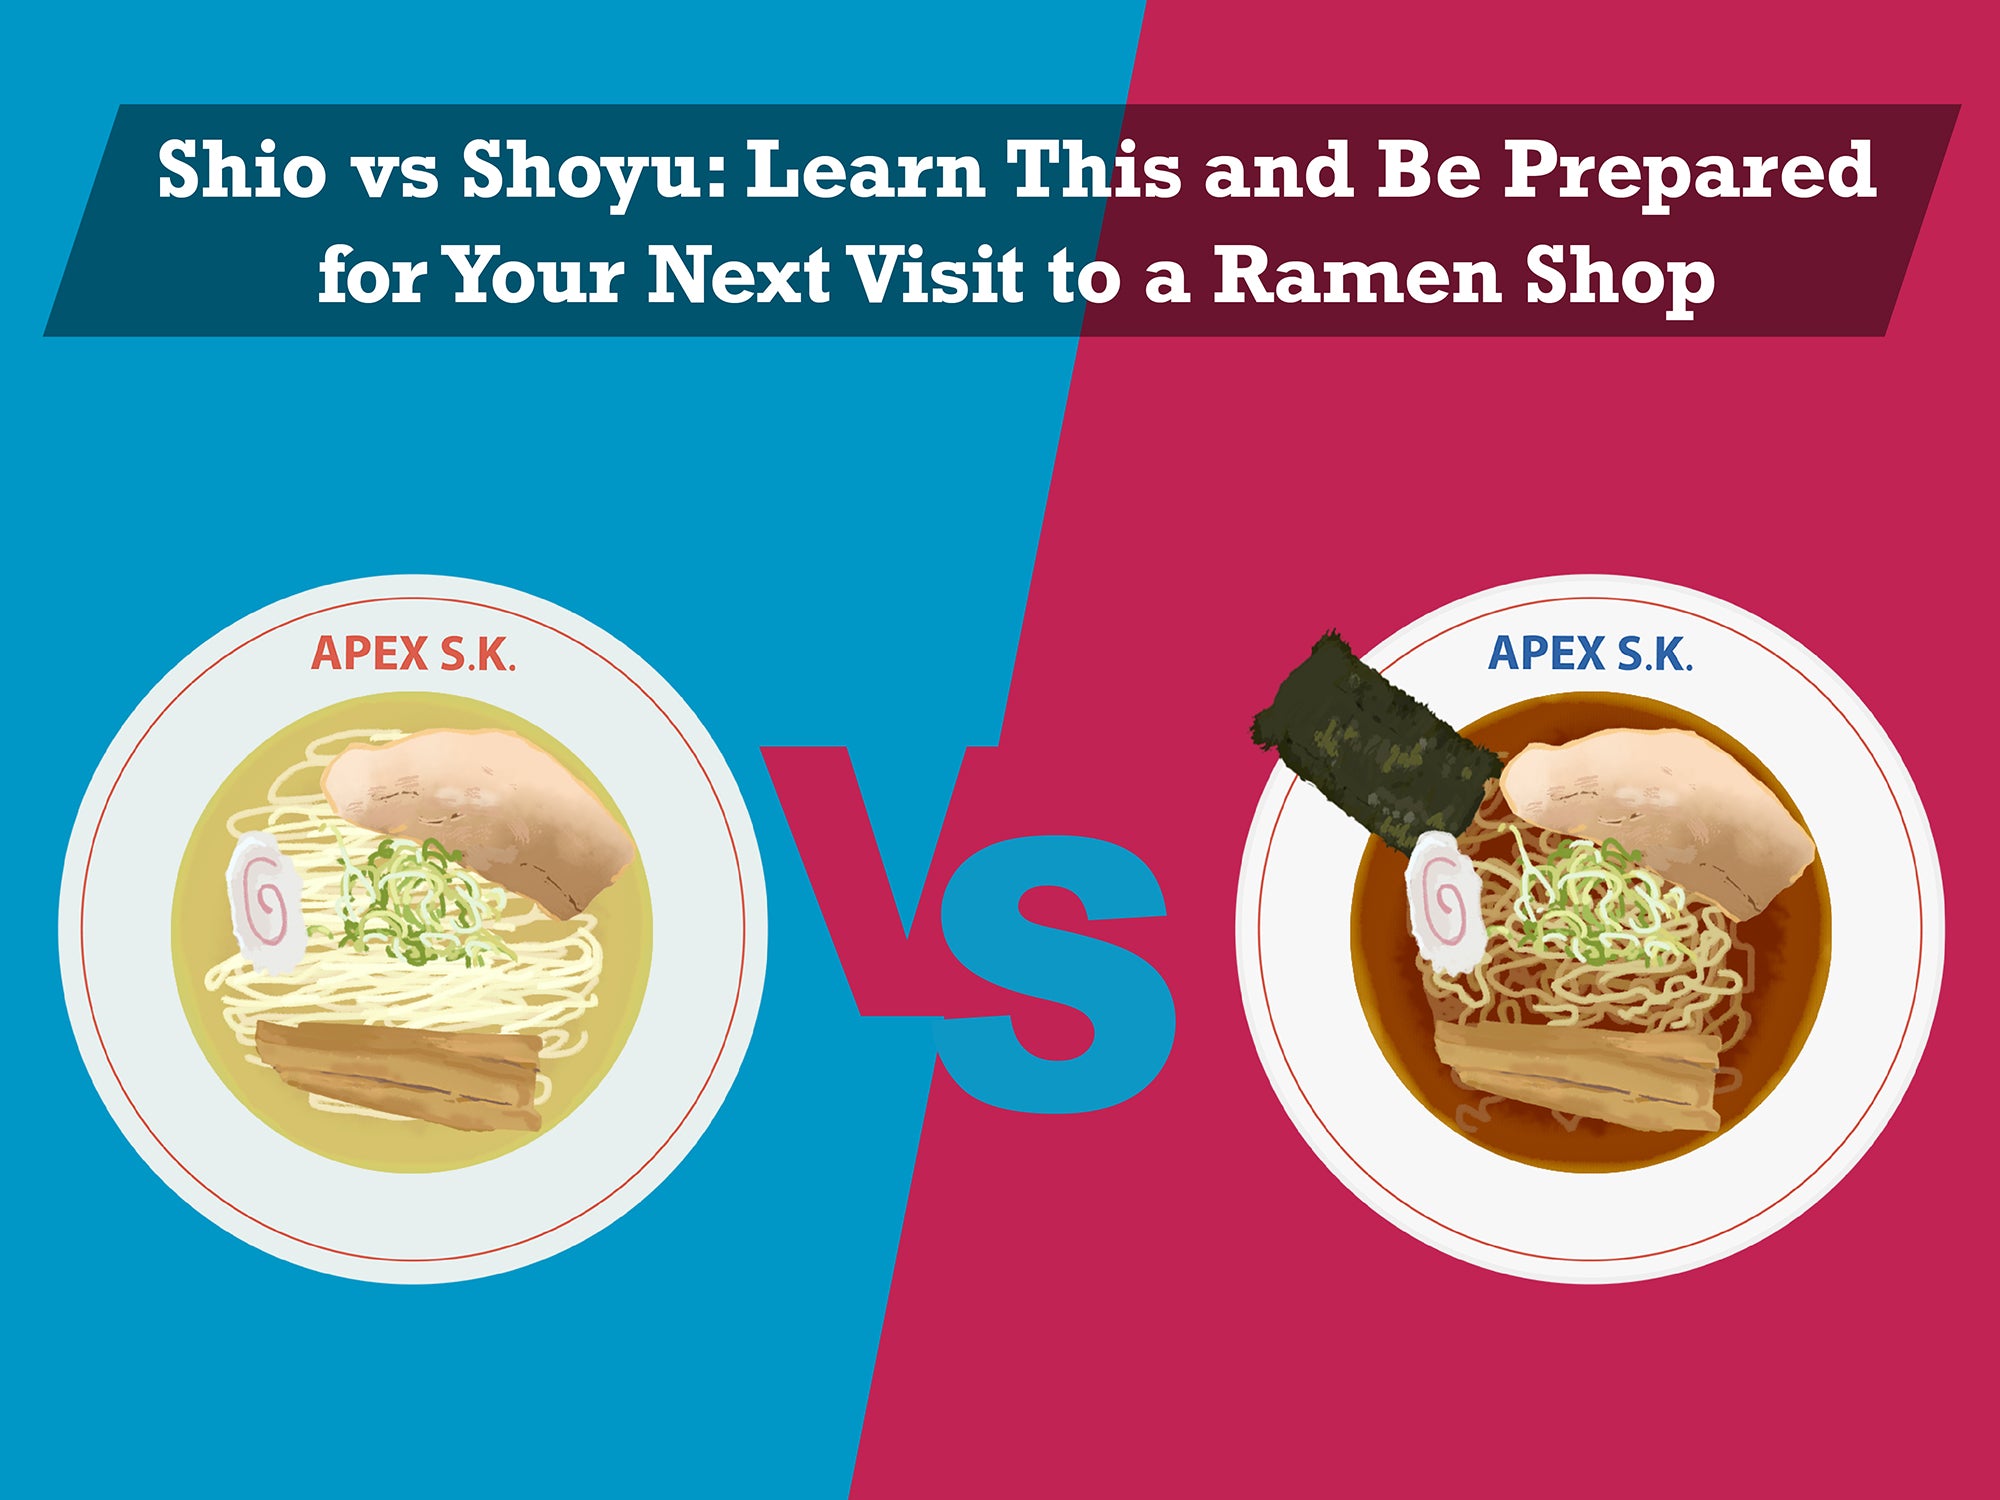 Shio vs Shoyu: Learn This and Be Prepared for Your Next Visit to a Ramen Shop